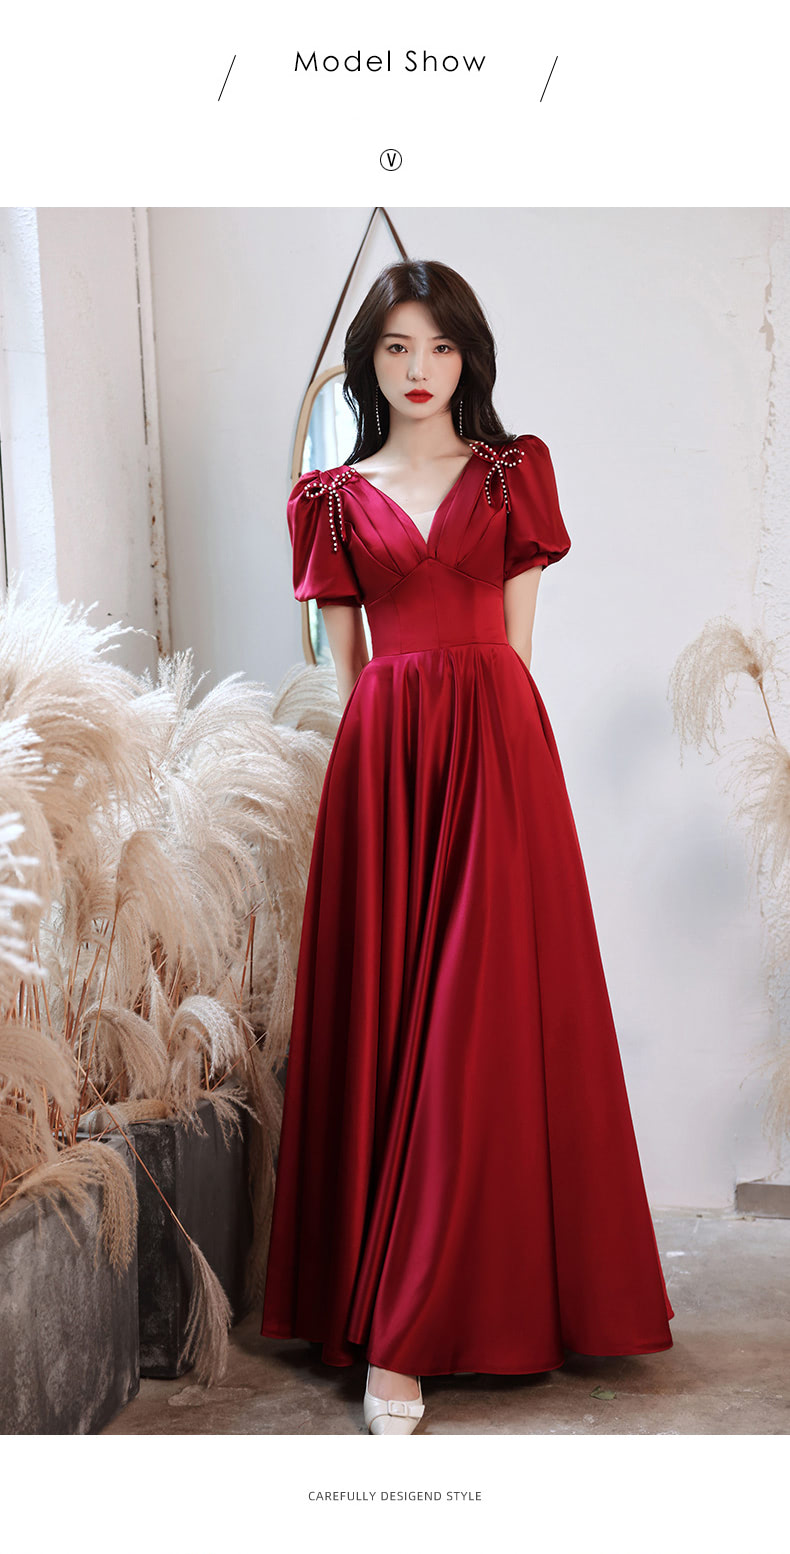 Satin-Junior-Senior-Prom-Gown-Evening-Long-Dress-with-Sleeves10.jpg